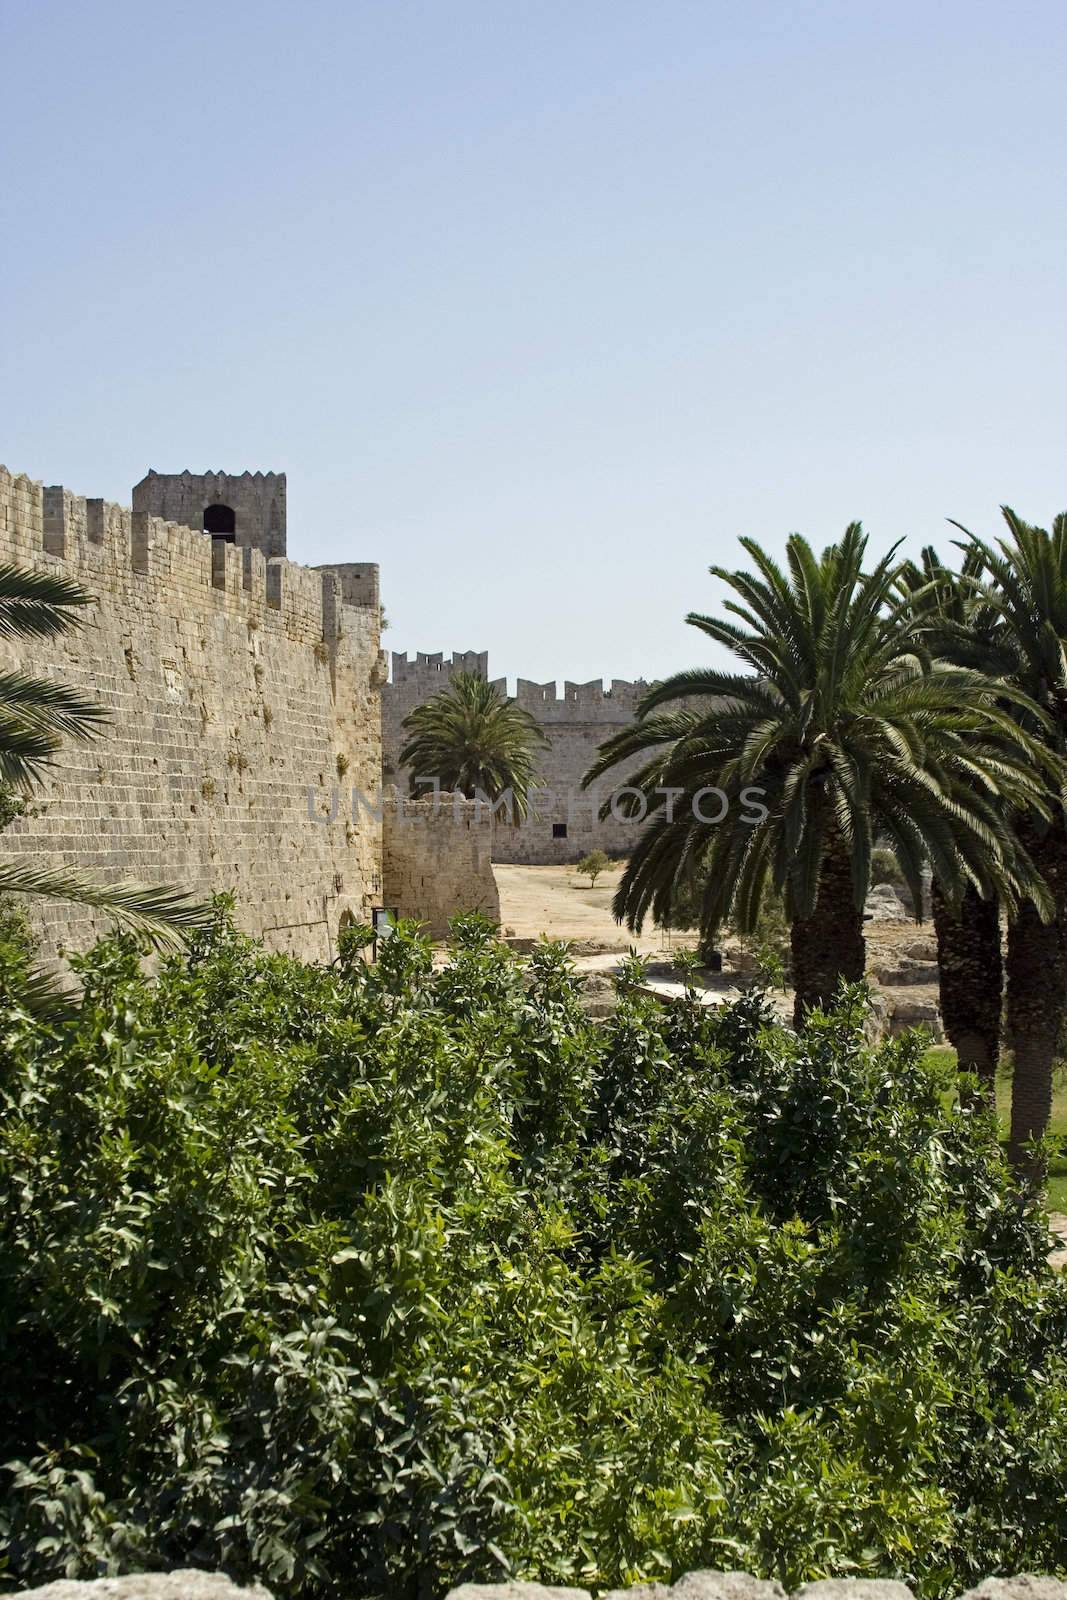 rhodes City - a part of the city wall